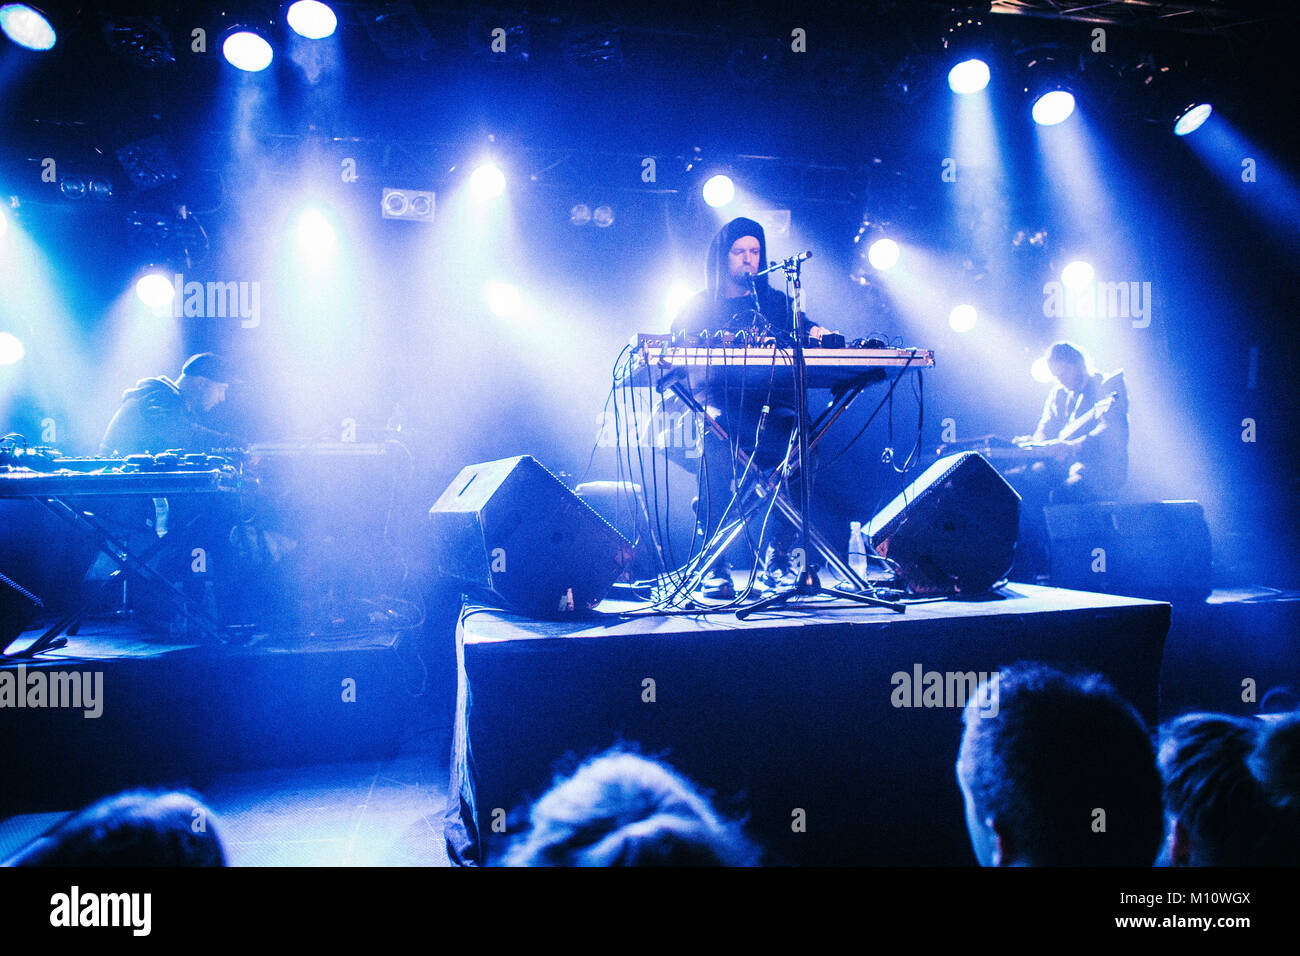 The Englishman, electronic music producer and singer Sohn (S O H N) performs a live concert at Pumpehuset during Frost Festival 2014 in Copenhagen. Denmark 01/03 2014. Stock Photo